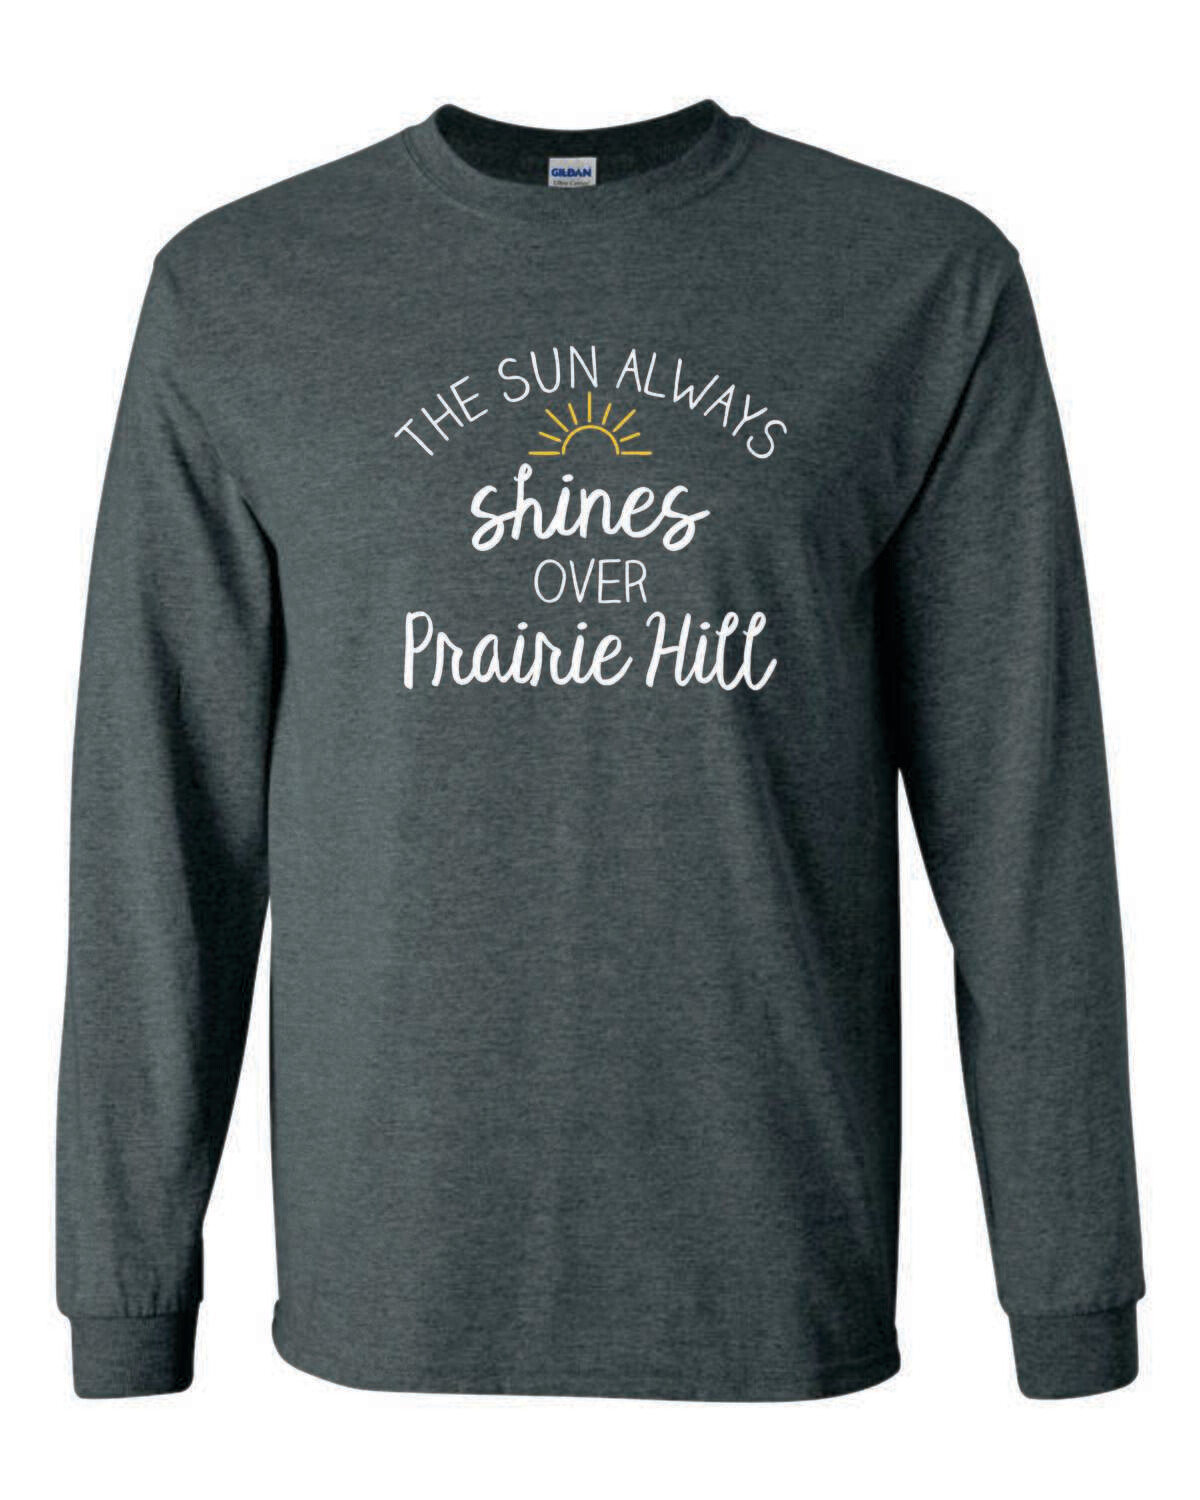 THE SUN ALWAYS SHINES OVER PRAIRE HILL LONG SLEEVE T-SHIRT, 7 COLOR OPTIONS